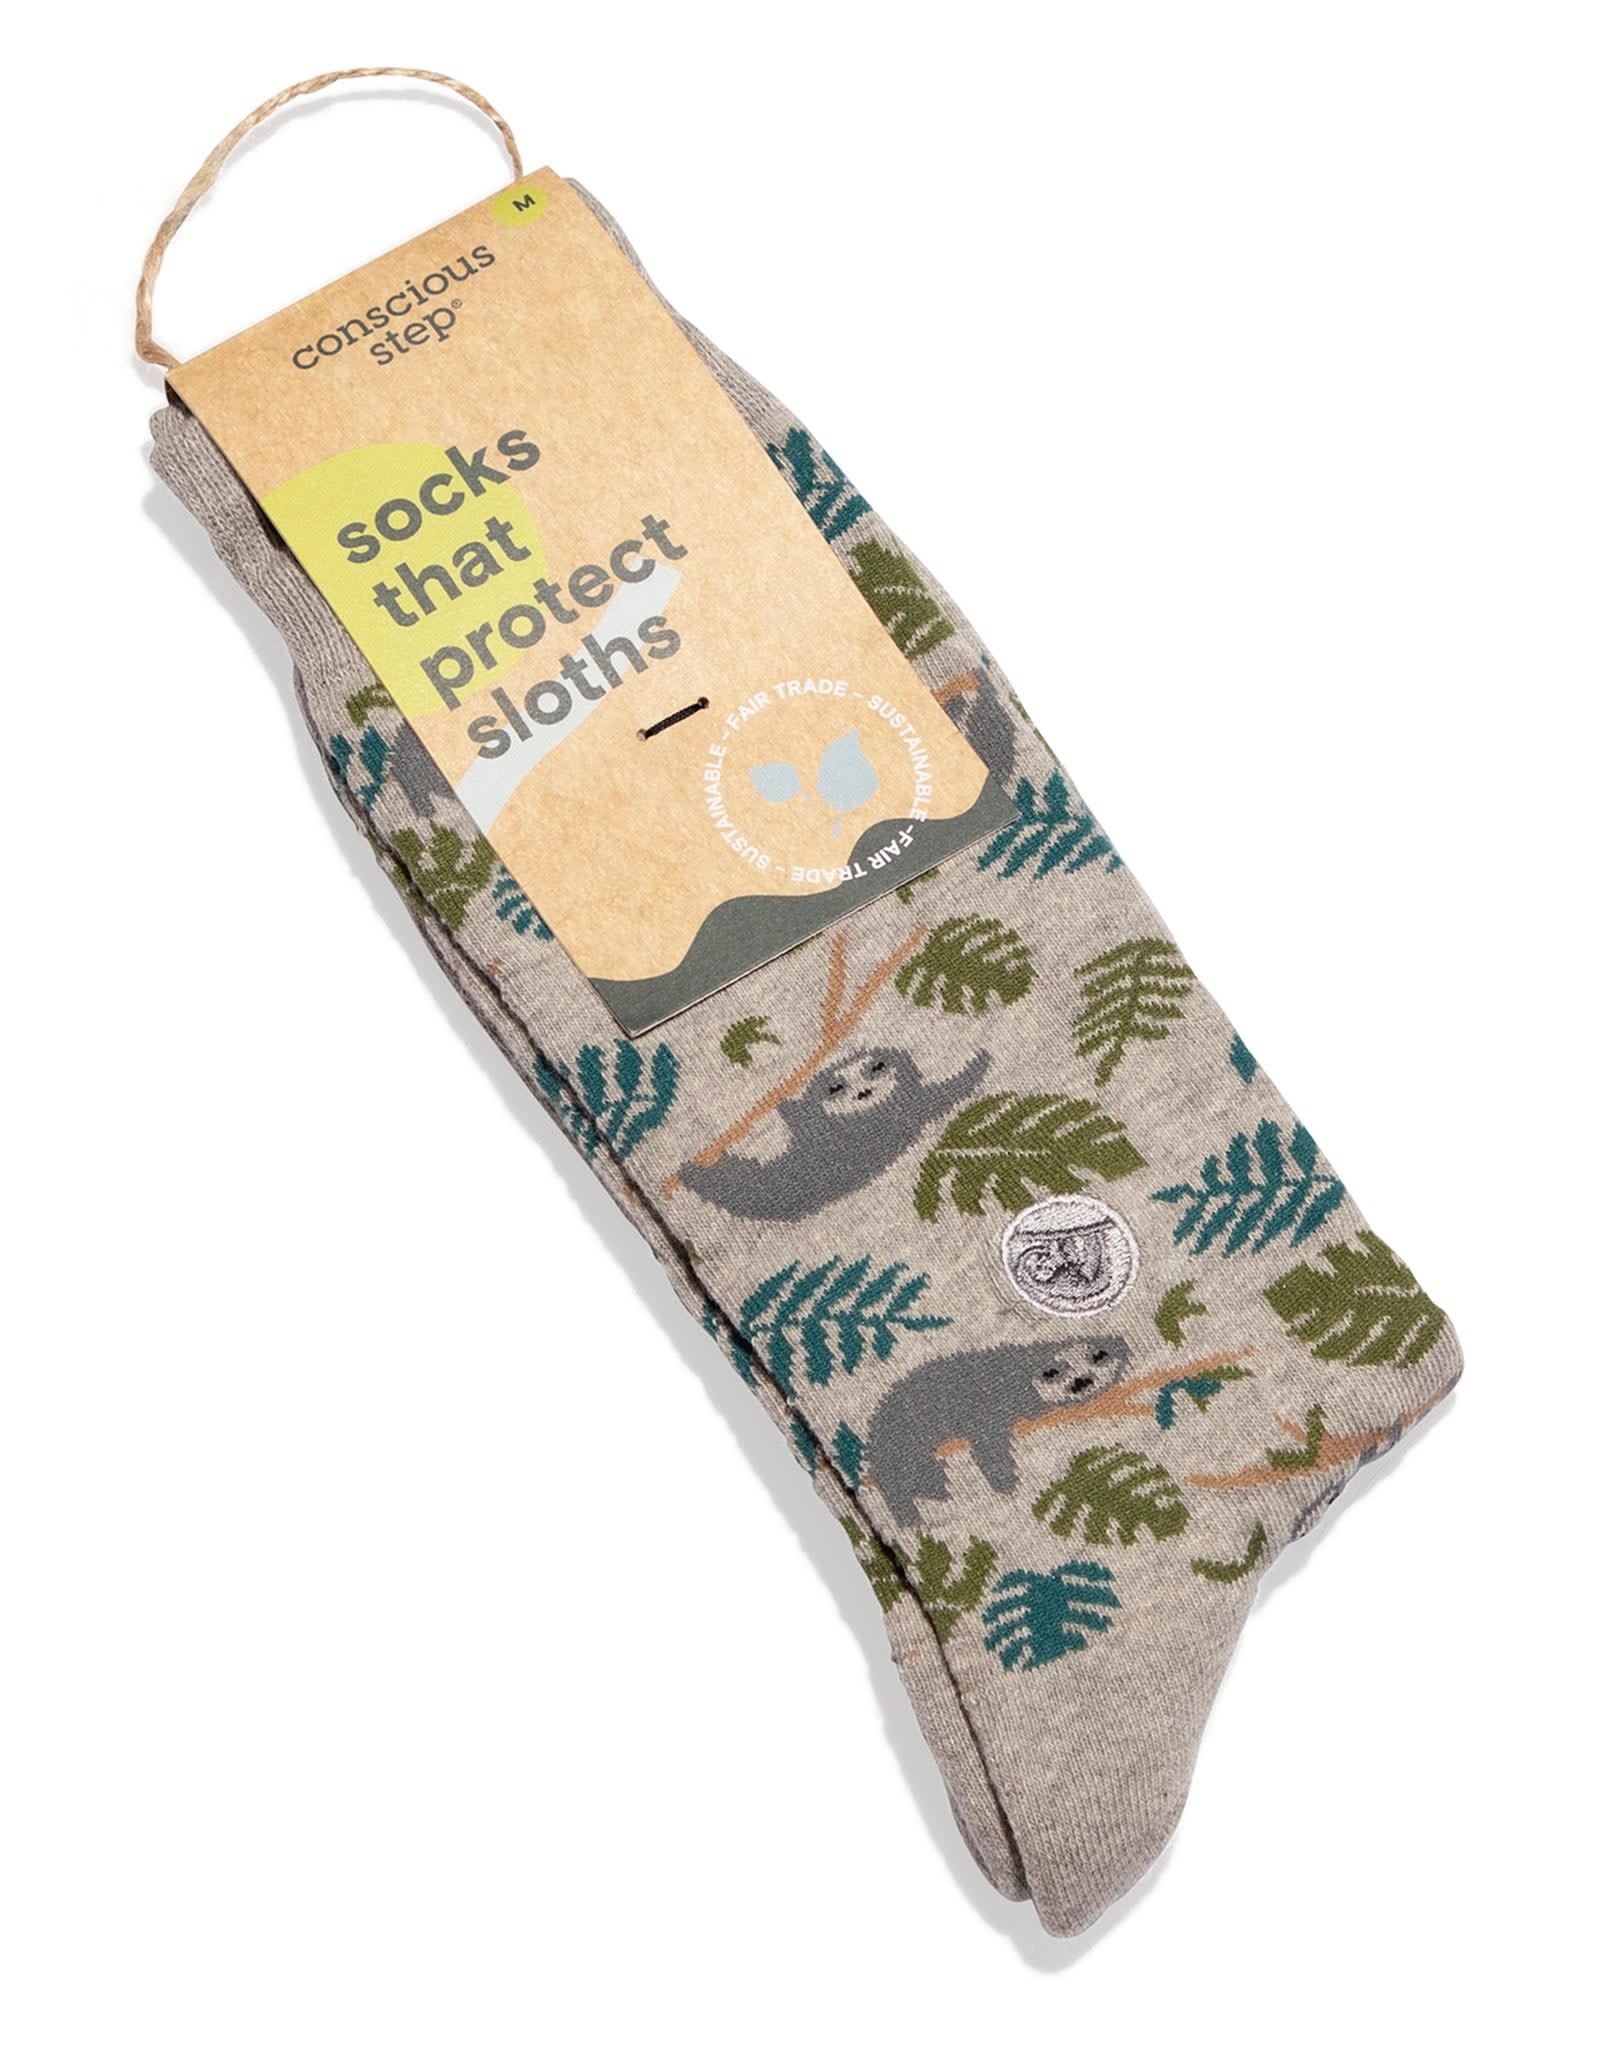 Conscious Step Socks that Protect Sloths - Small